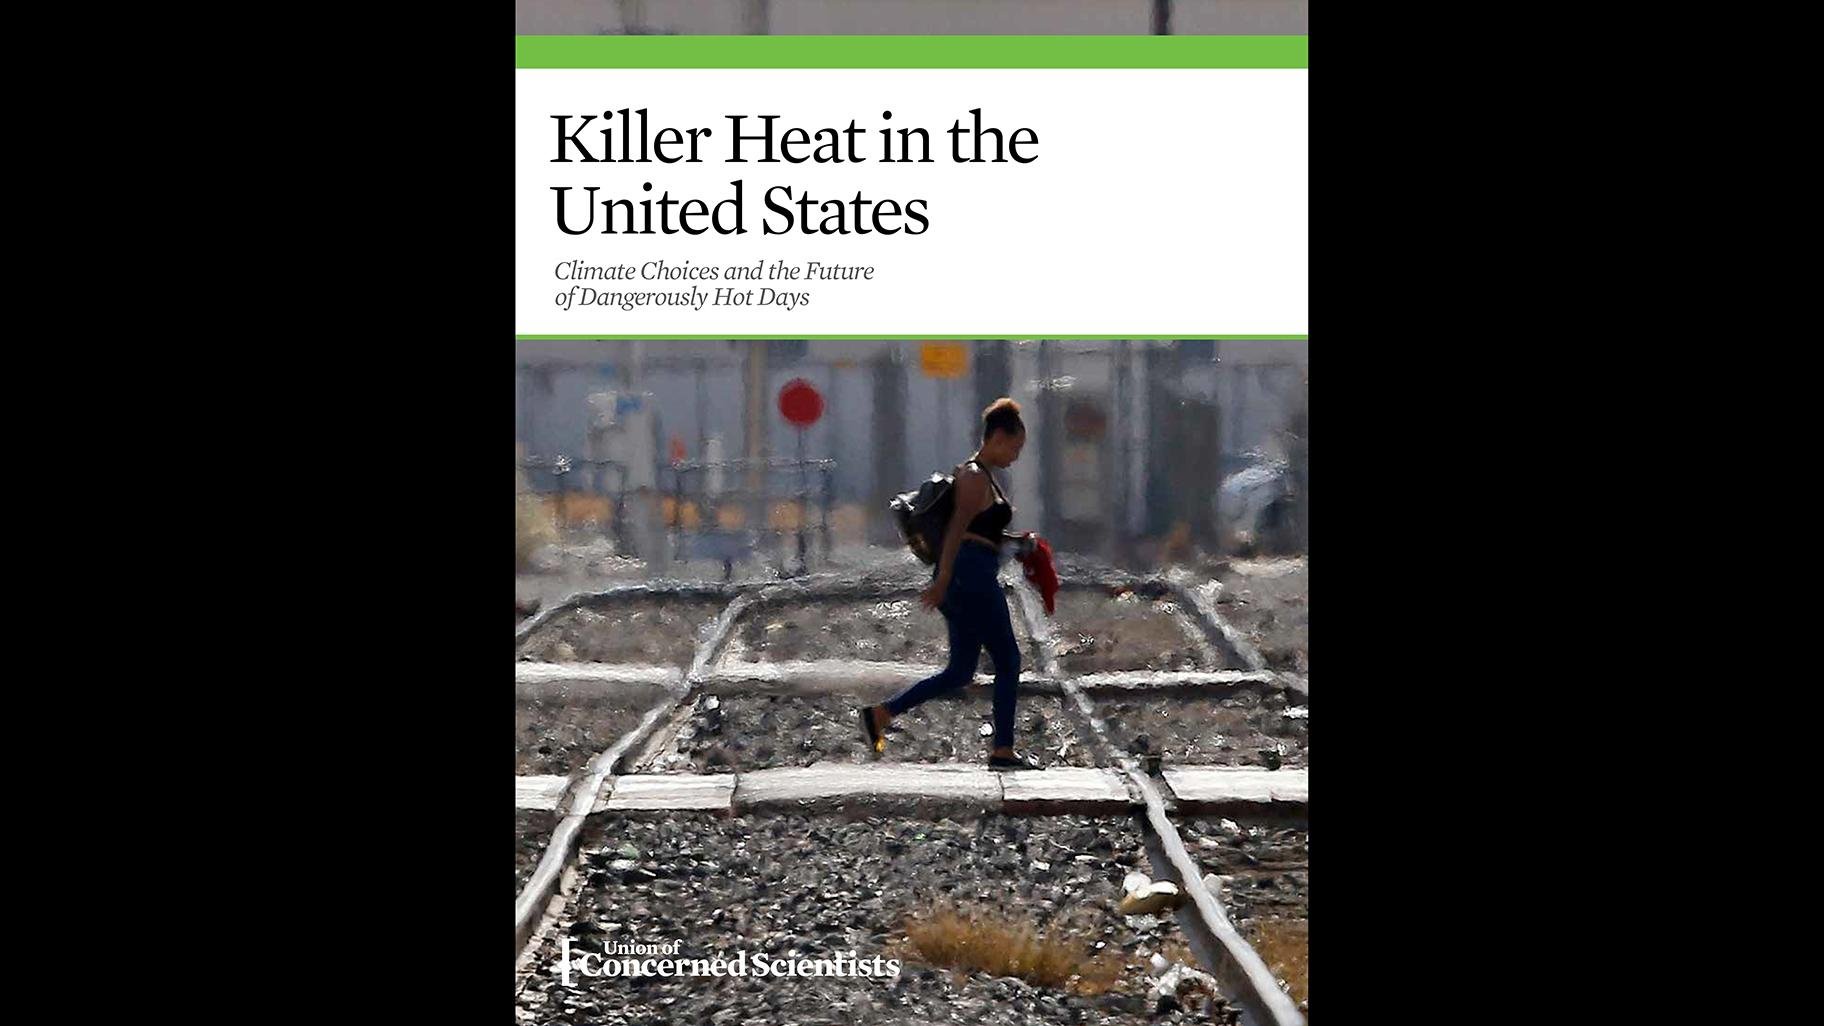 Read the full report, “Killer Heat in the United States” (Courtesy Union of Concerned Scientists) 